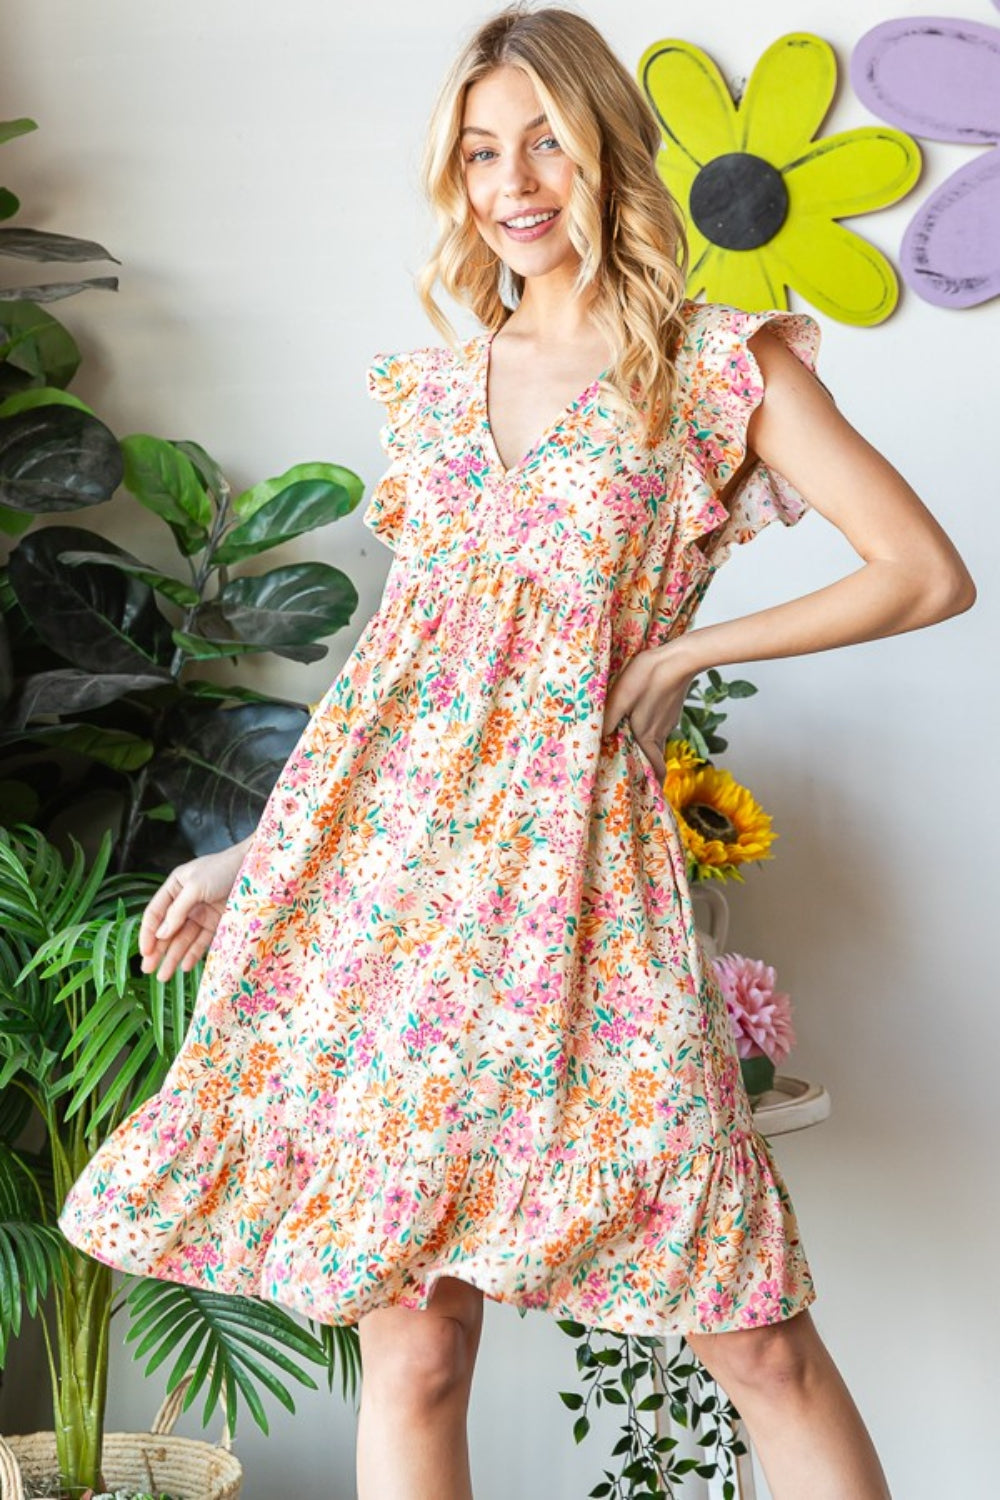 Follow Your Heart Floral Ruffled Dress - Joy & Country